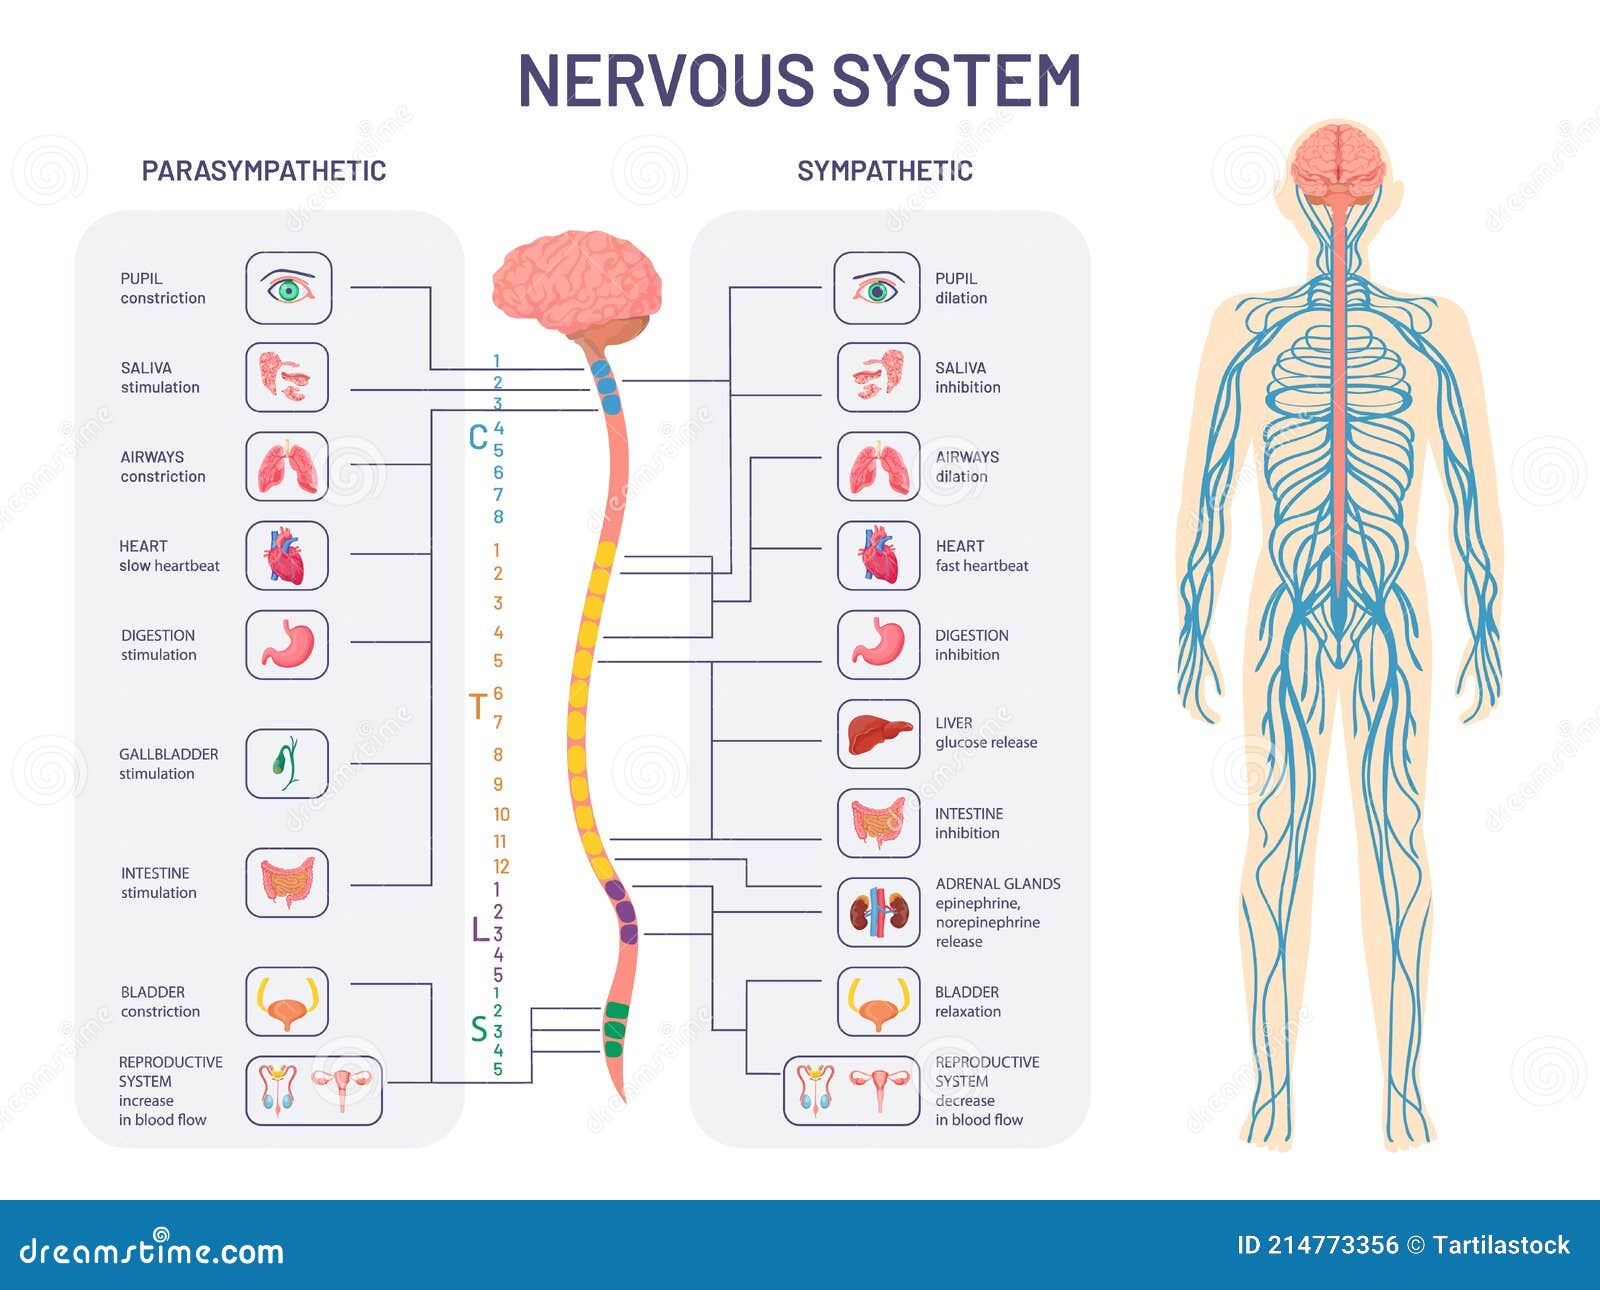 human nervous system. sympathetic and parasympathetic nerves anatomy and functions. spinal cord controls body internal